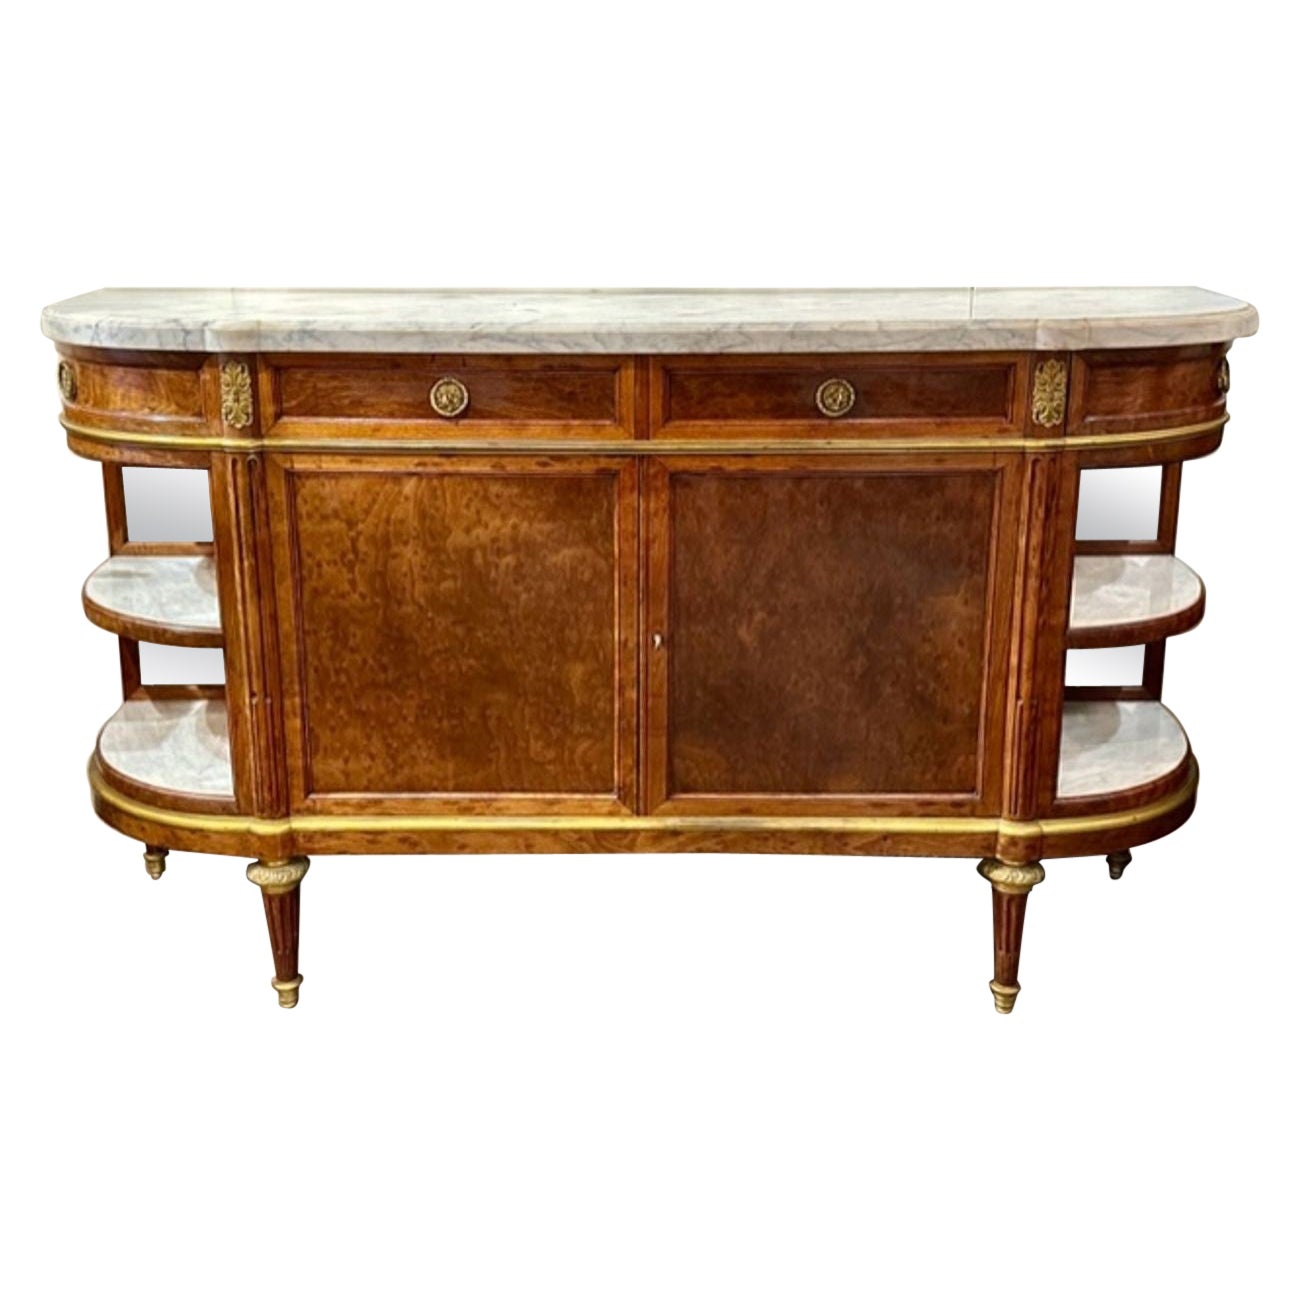 19th Century French Louis XVI Walnut Server with Carrara Marble Top For Sale